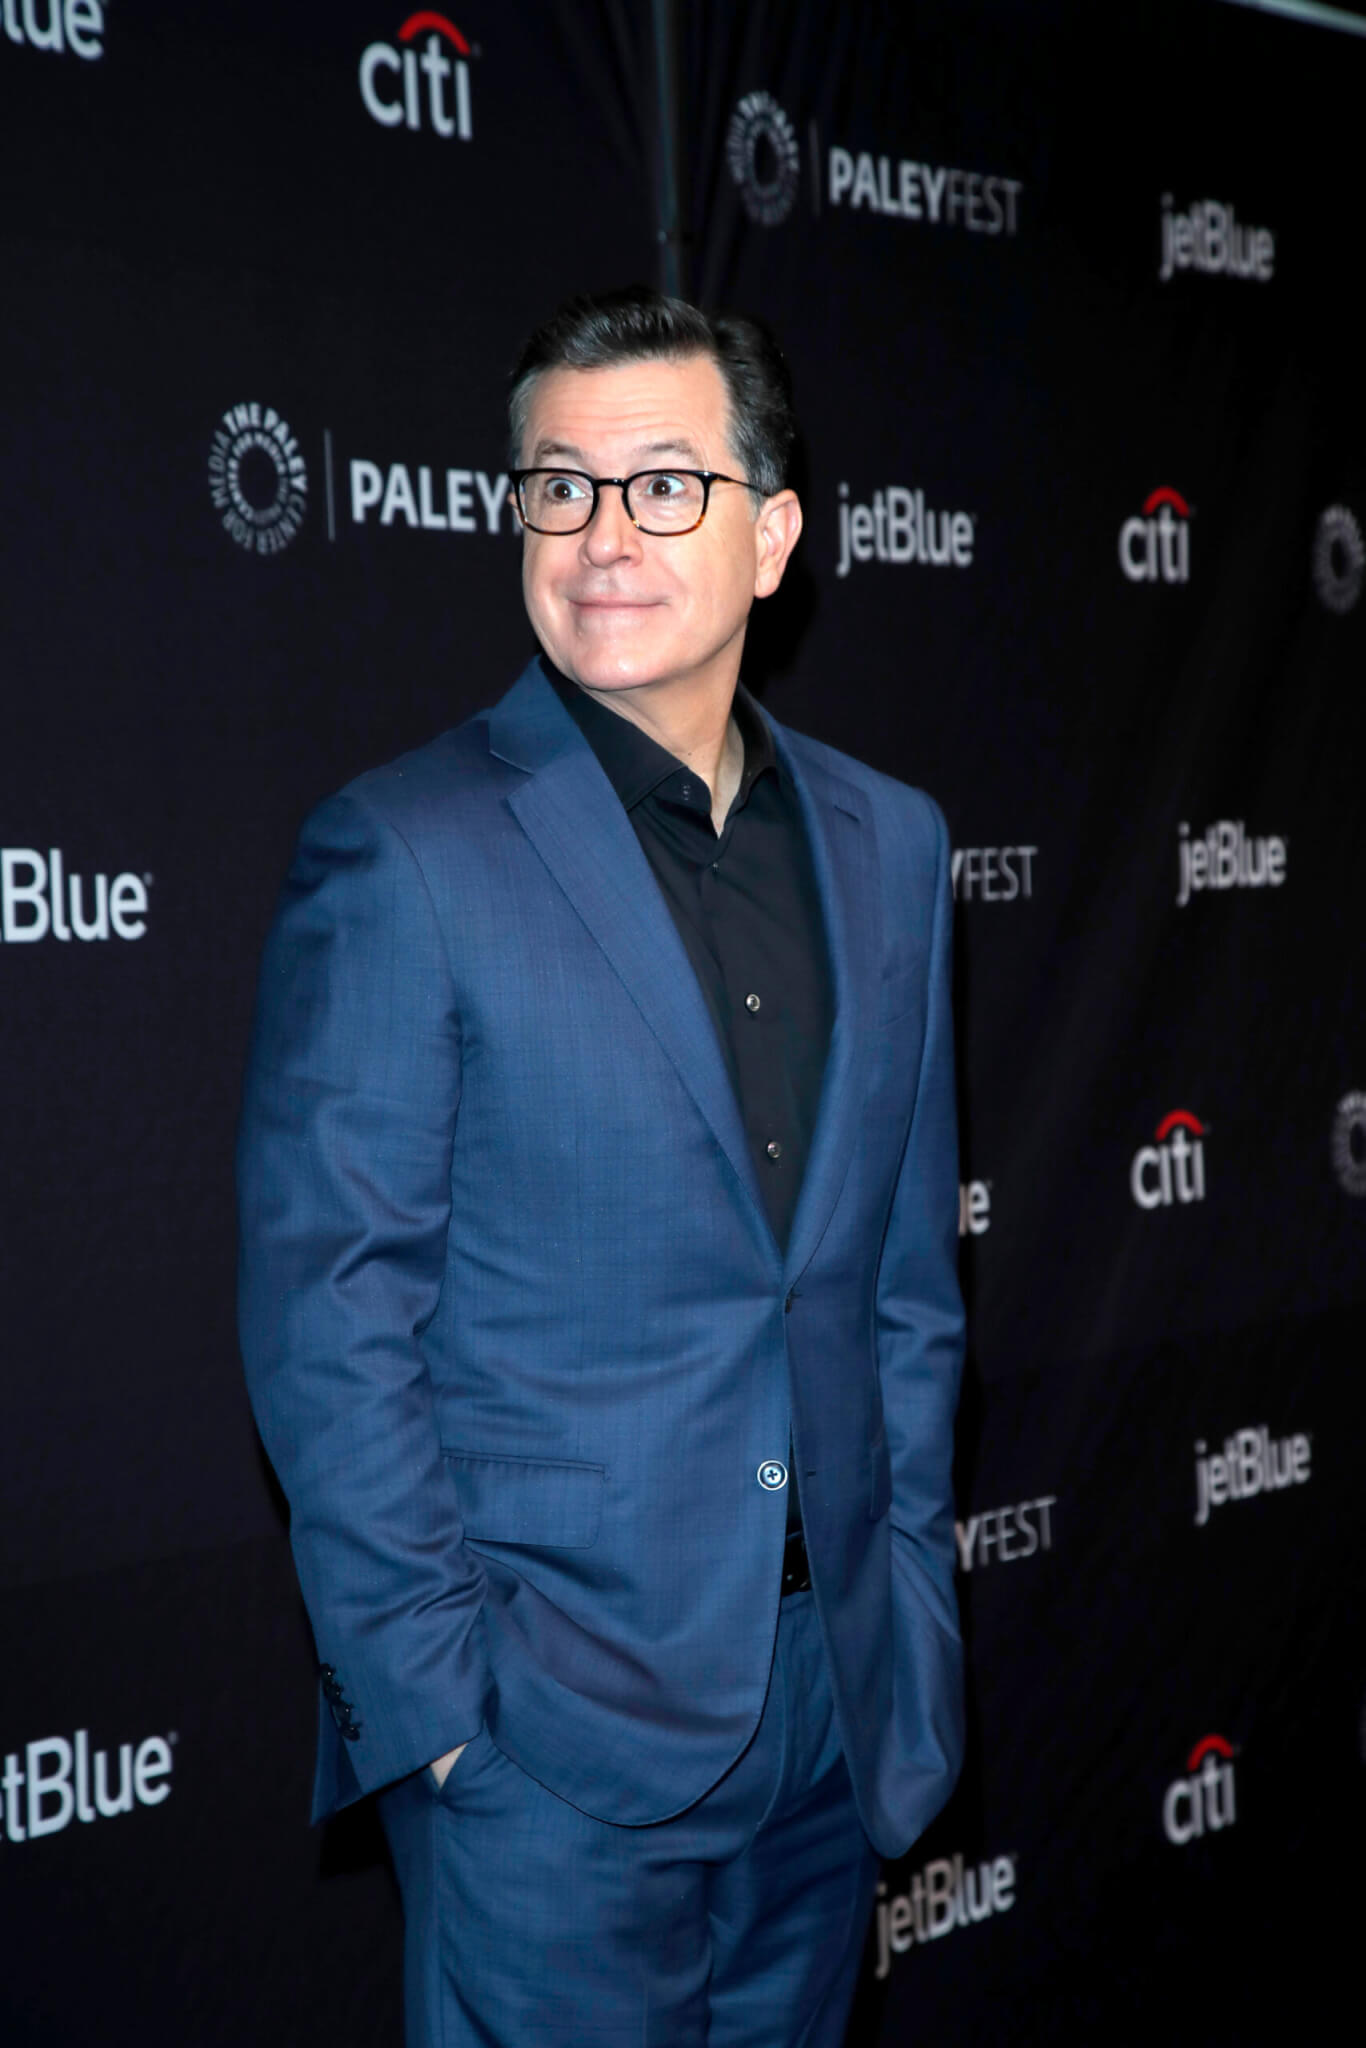 Stephen Colbert at the PaleyFest - "An Evening With Stephen Colbert" in 2019